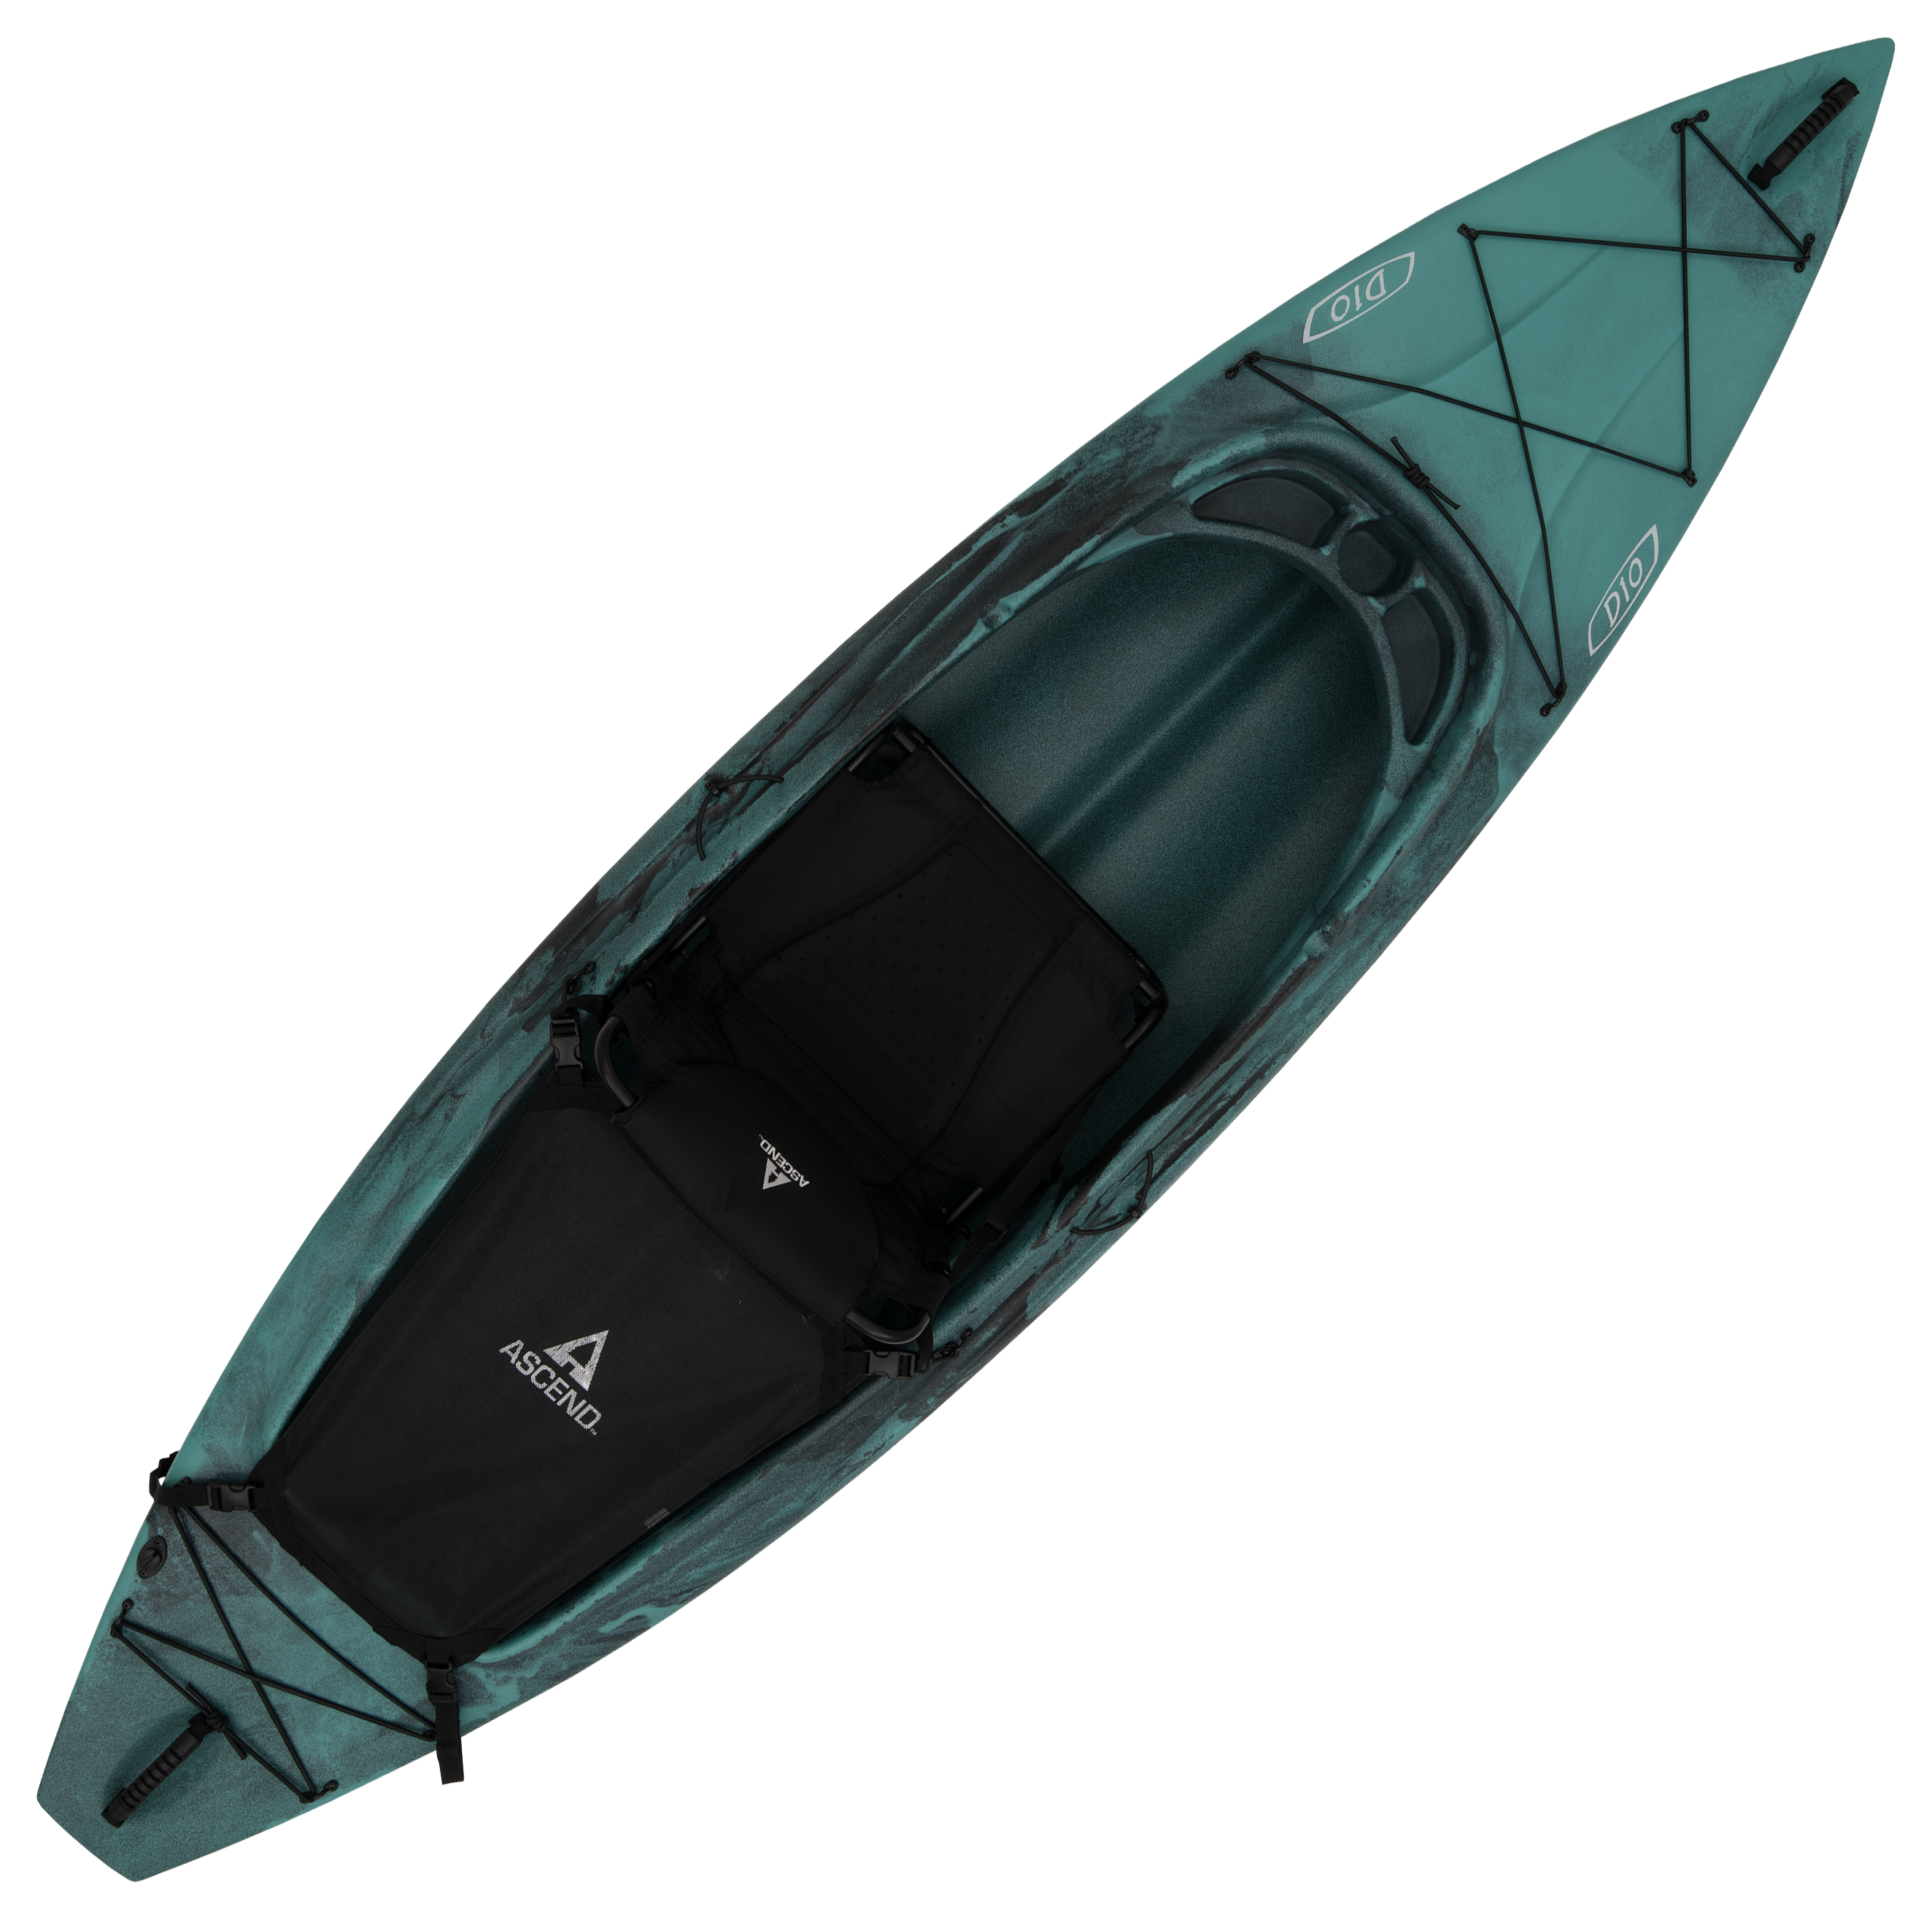 Dear Pelican Kayaks, Stop being stupid. Also, new saltwater combo